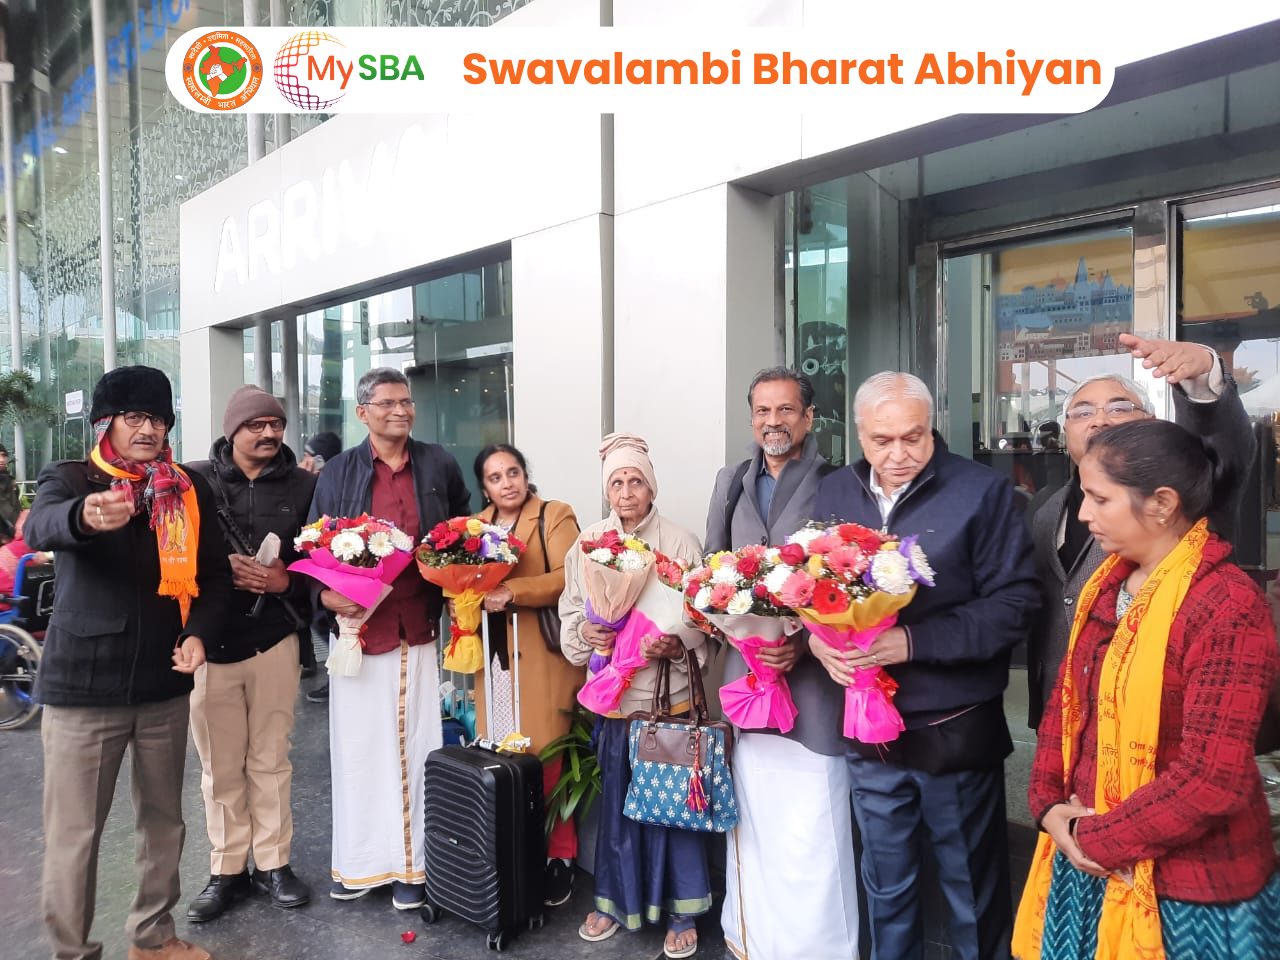 You are currently viewing All India Convenor, Shri Sundaram ji was given a grand welcome at Lucknow Airport, along with Padma Shri Shridhar Vembu ji